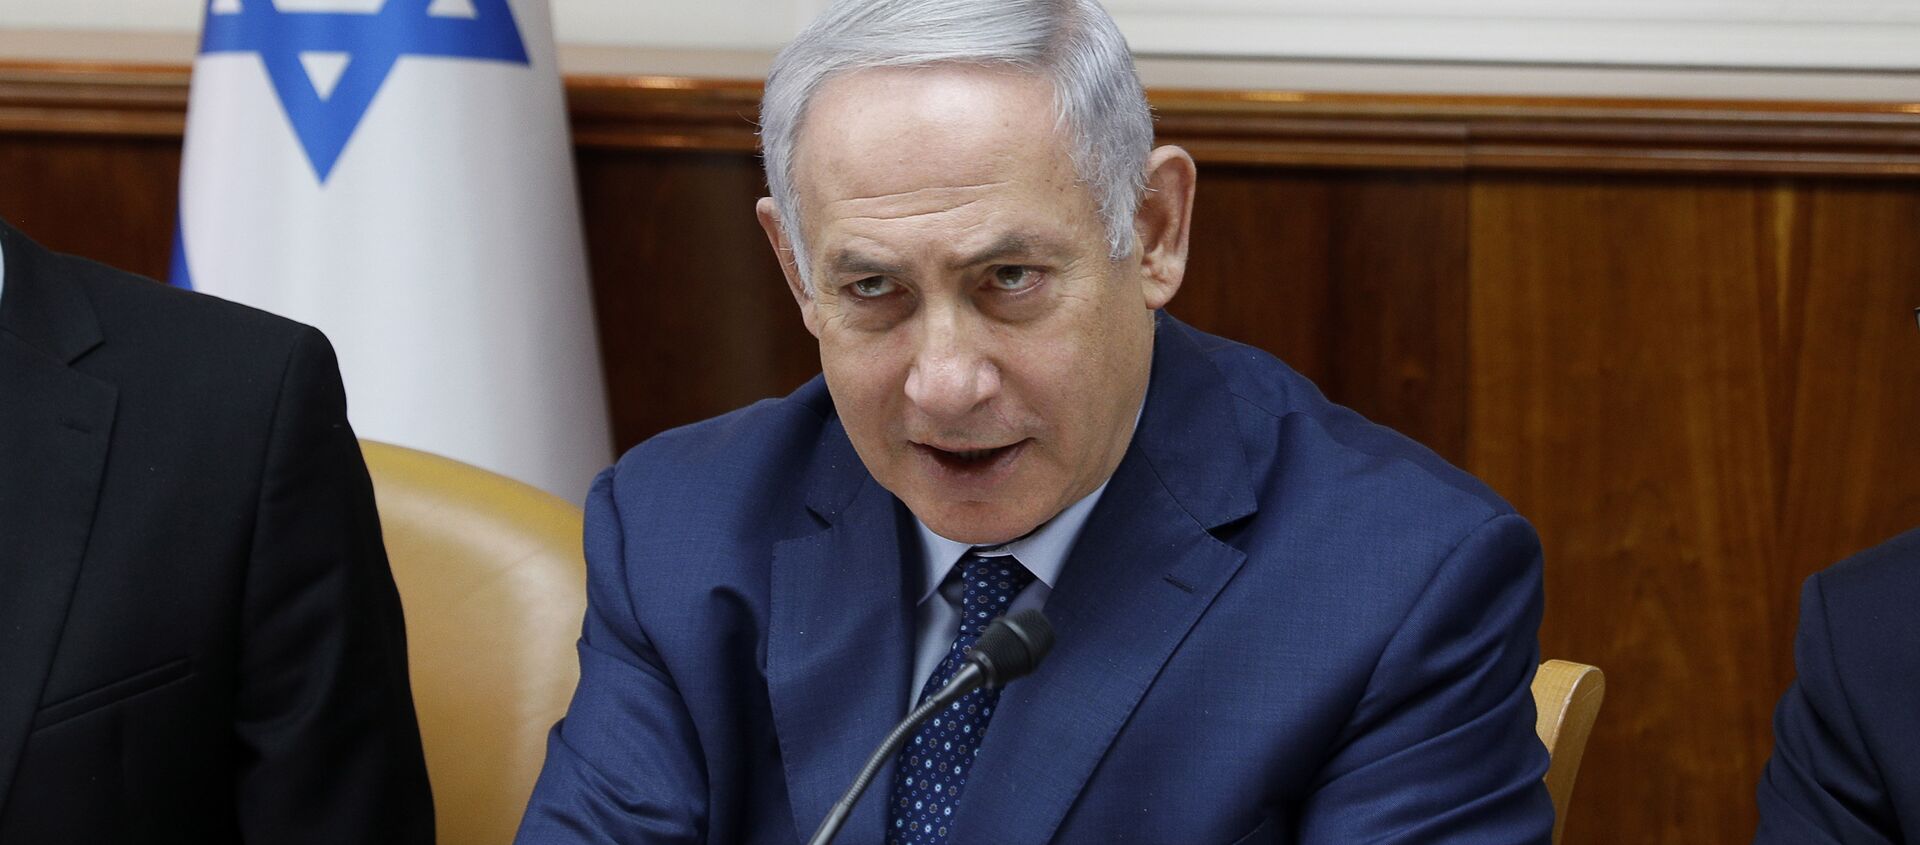 Israeli Prime Minister Benjamin Netanyahu chairs the weekly cabinet meeting at the Prime Minister's office in Jerusalem, Sunday, April 15, 2018 - Sputnik Moldova, 1920, 03.06.2021